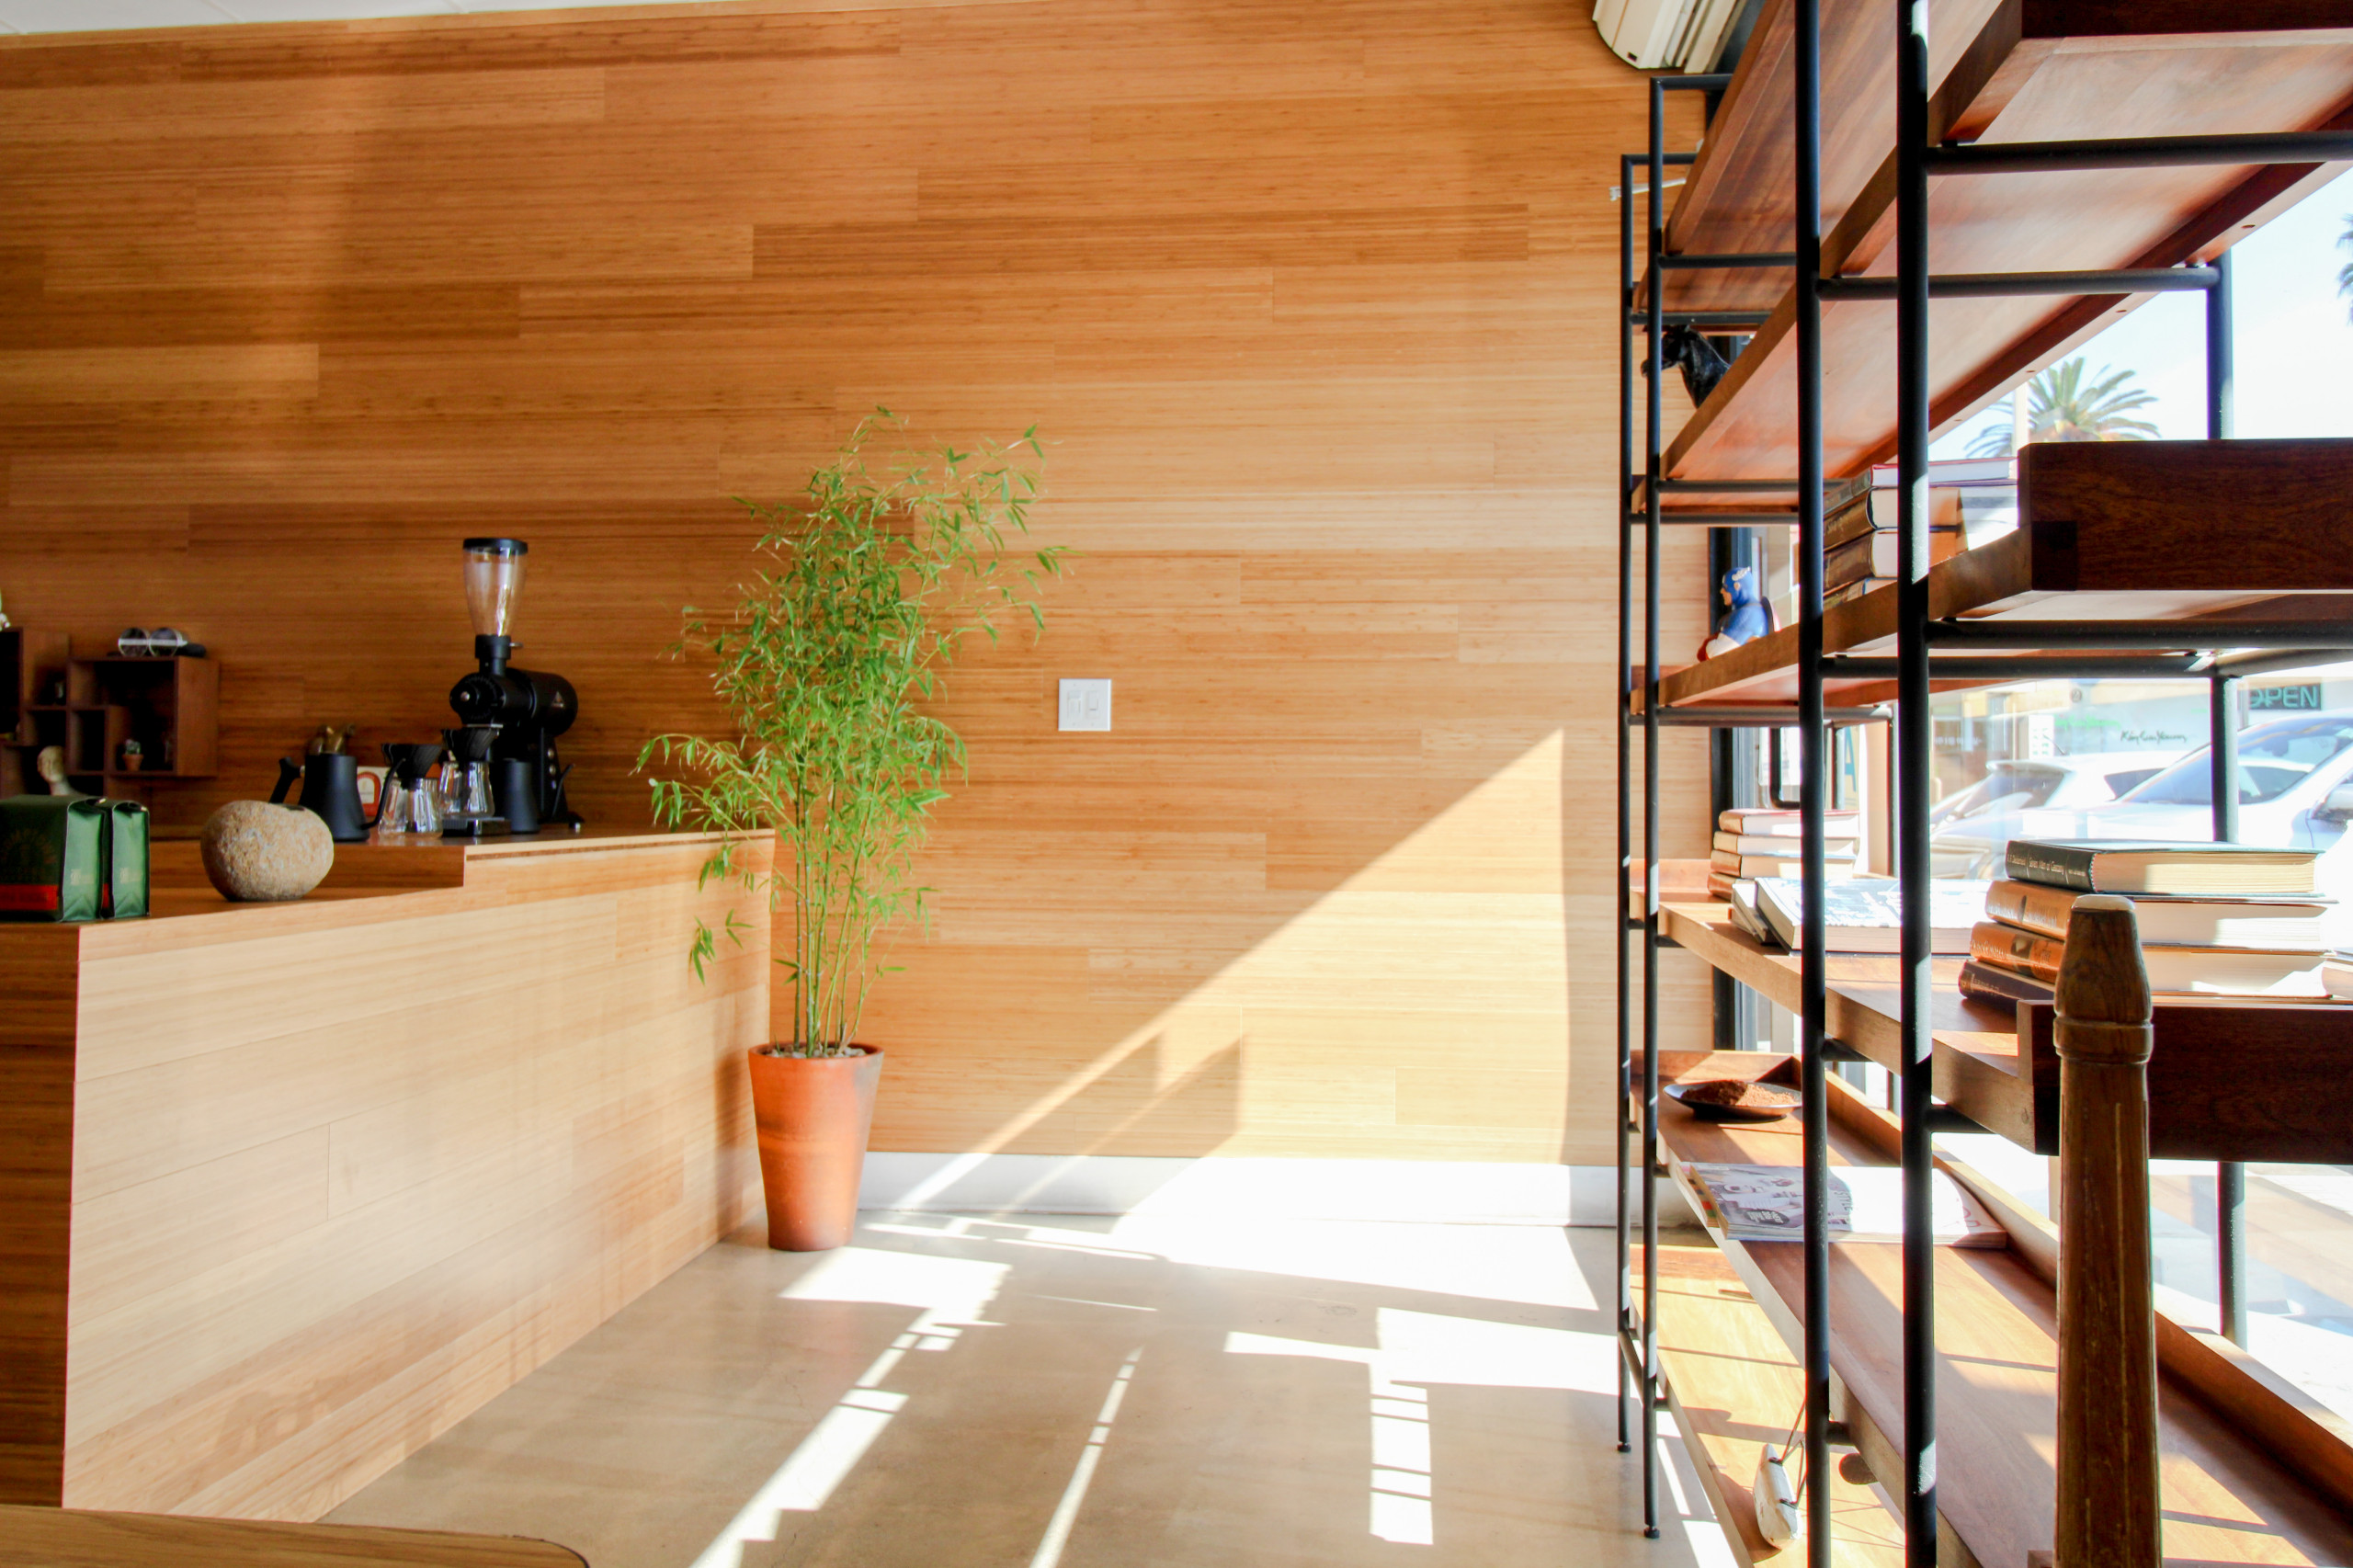 Los Angeles, CA - Commercial Coffee House Renovation Installation of Bamboo wood paneling, tile flooring and counter area.